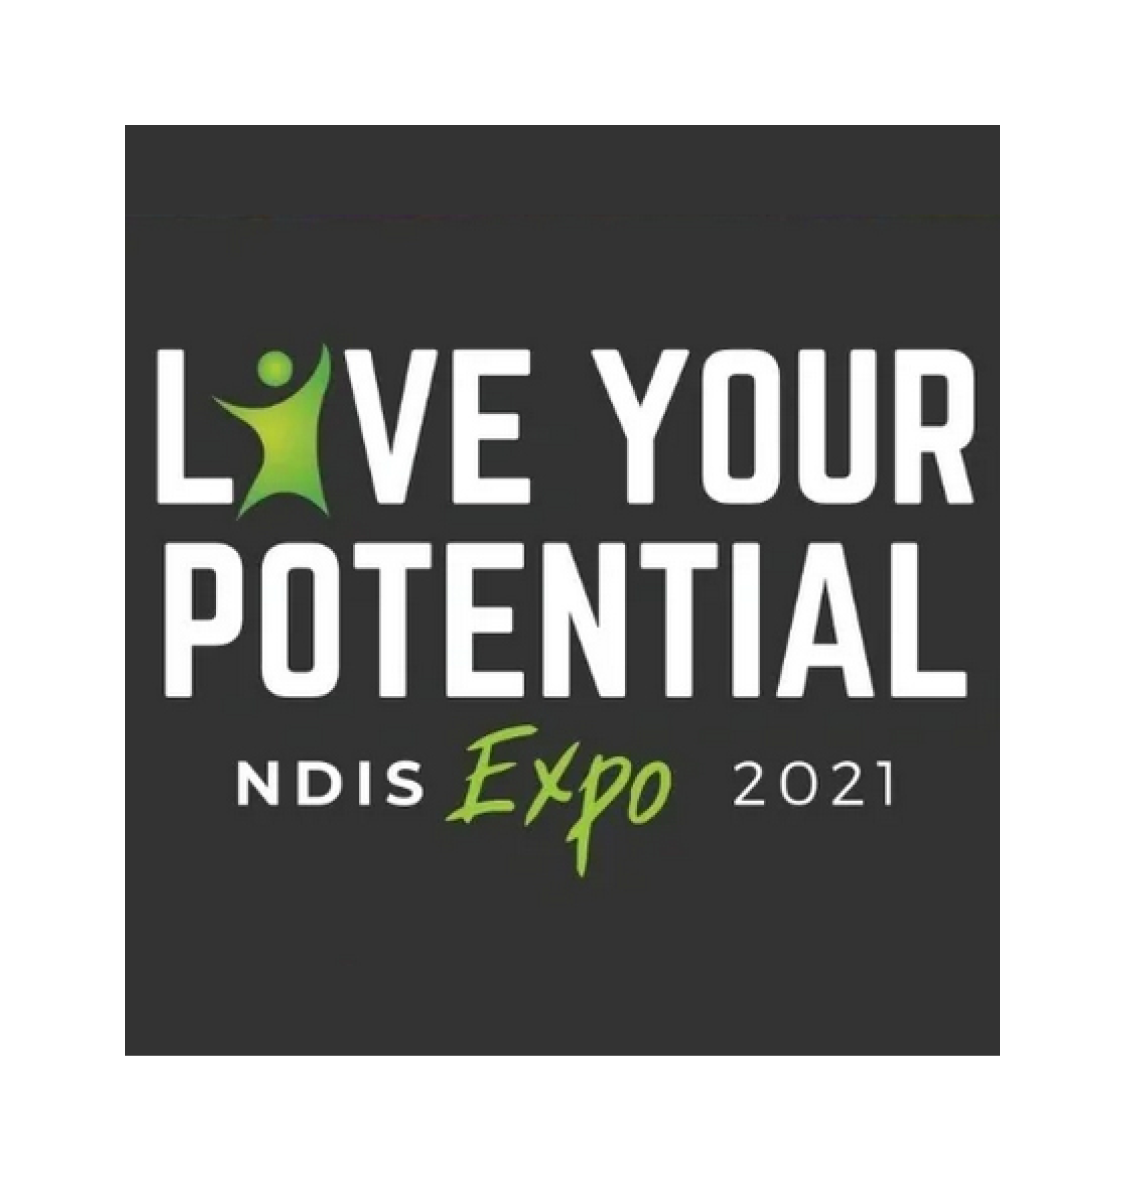 Live Your Potential NDIS Expo 